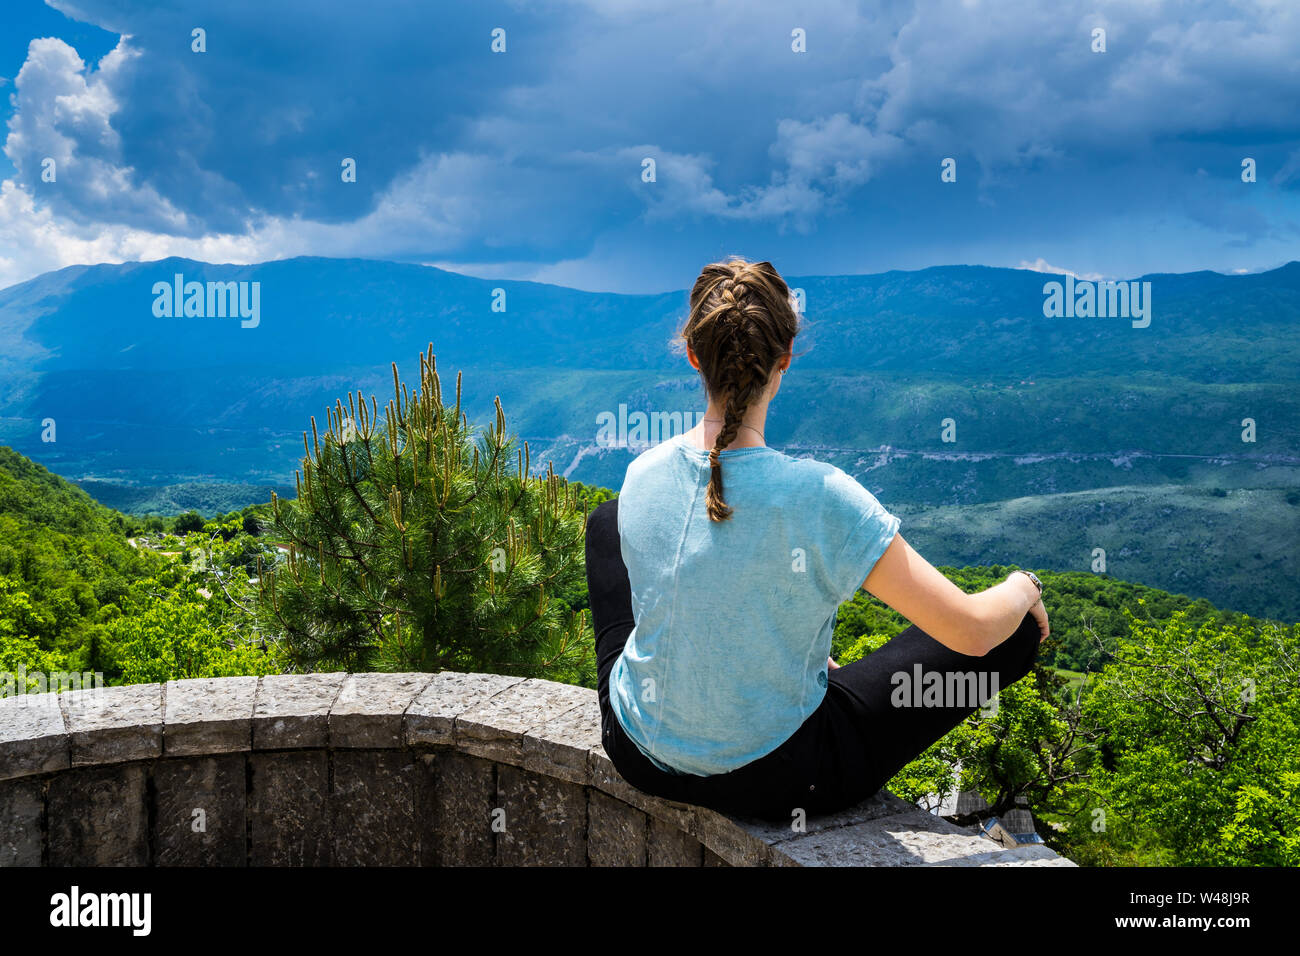 Montenegro, Beautiful young girl sitting in tailor seat on a stone wall enjoying wide view over green nature landscape bjelopavlici plain lowlands val Stock Photo